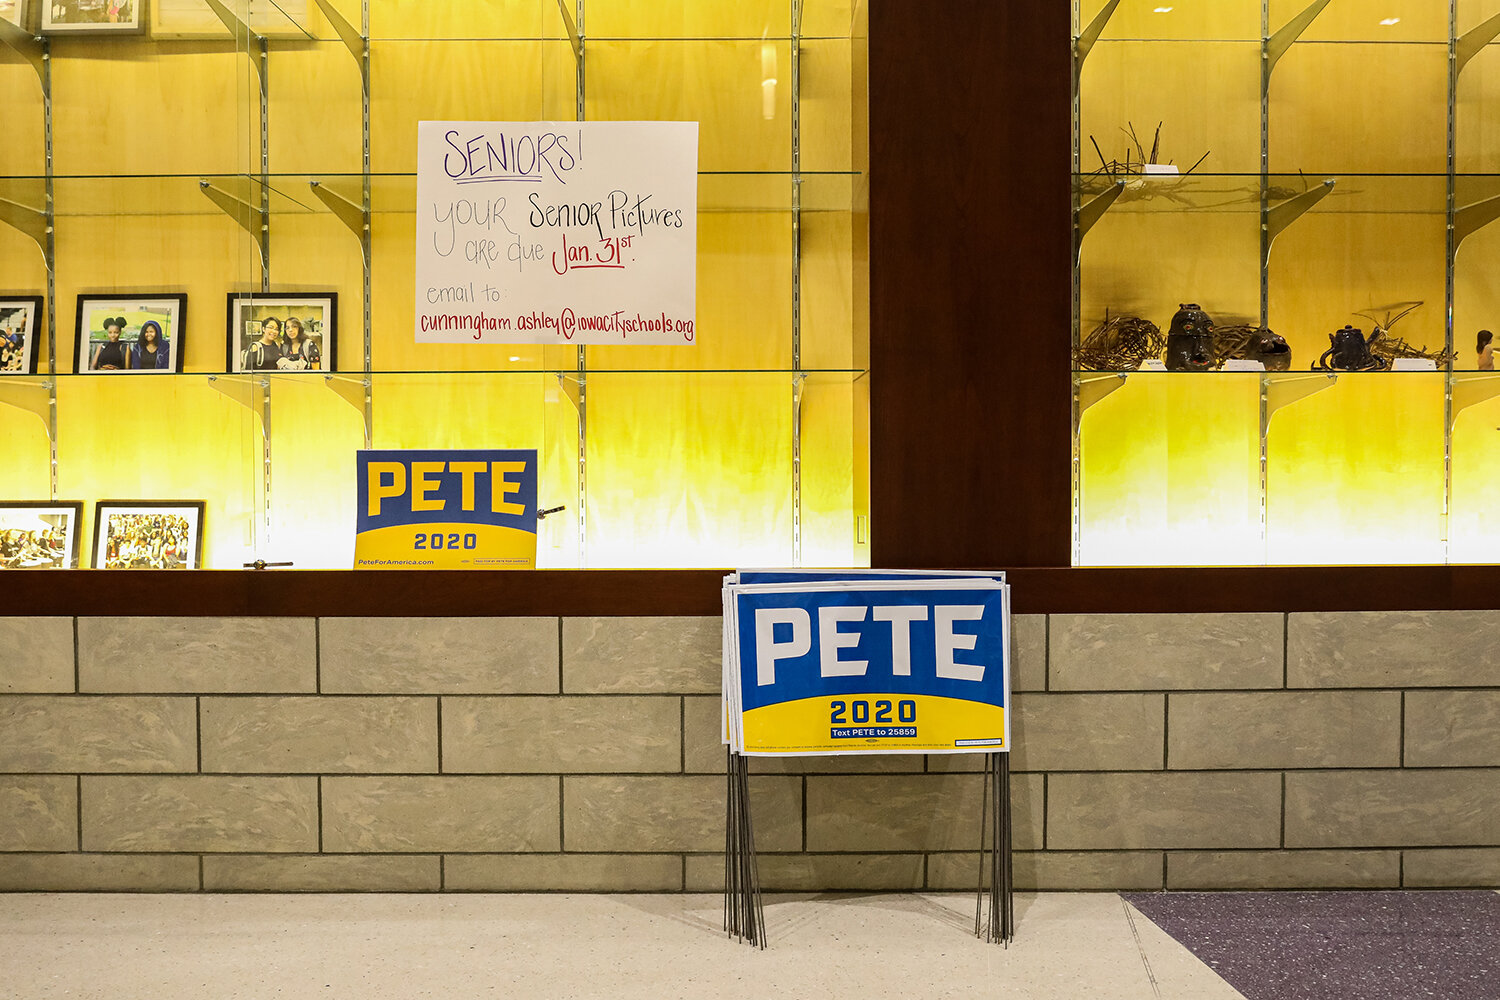  Campaign signs for Democratic presidential candidate Pete Buttigieg sit in the hallway before a campaign rally at Liberty High School in North Liberty, IA on Monday, Jan. 27, 2020.  